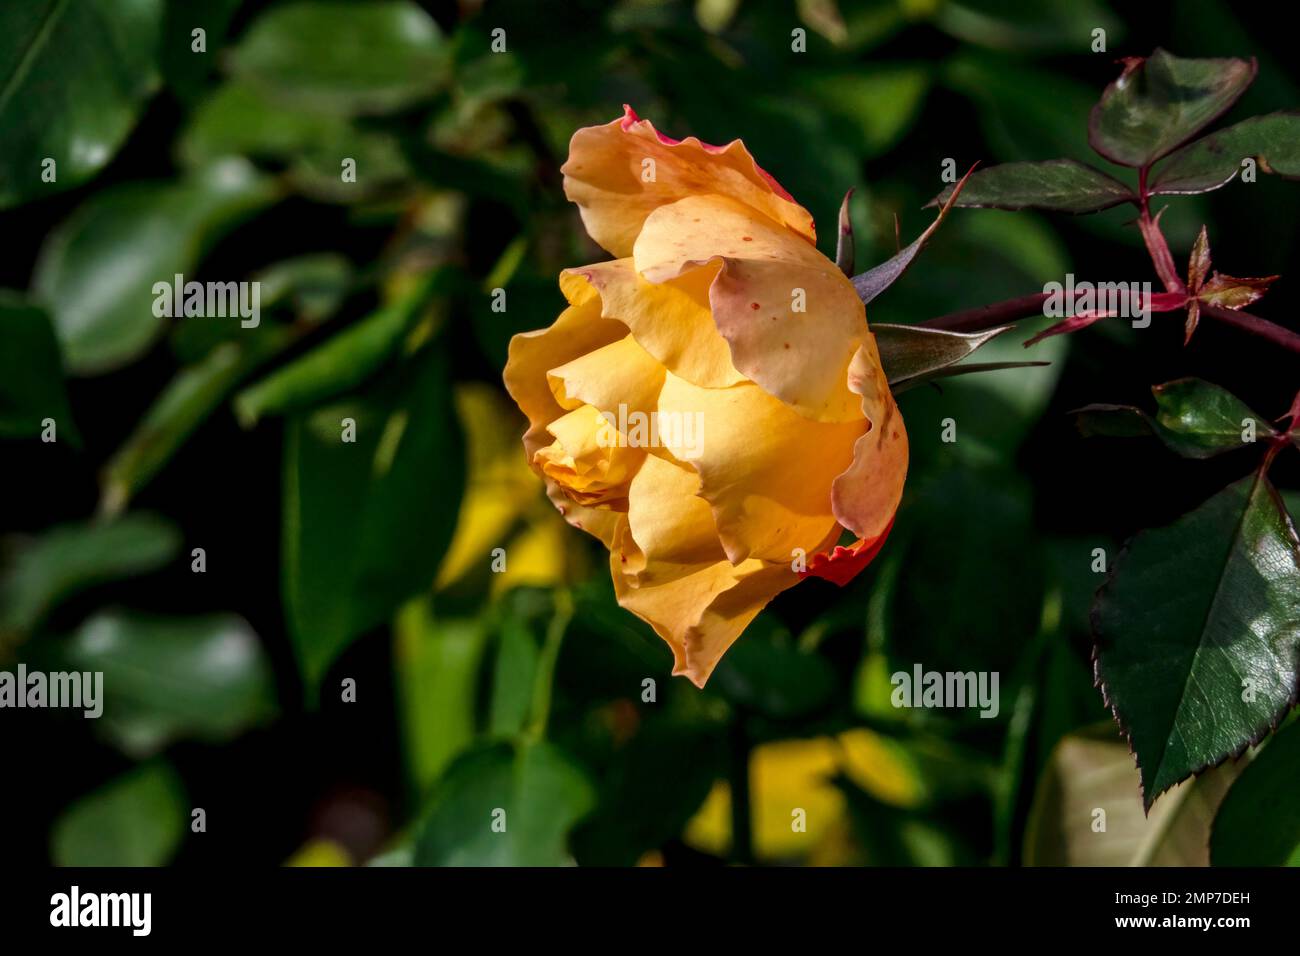 Beautiful yellow rose flower close-up in a garden on a blurred background. Stock Photo